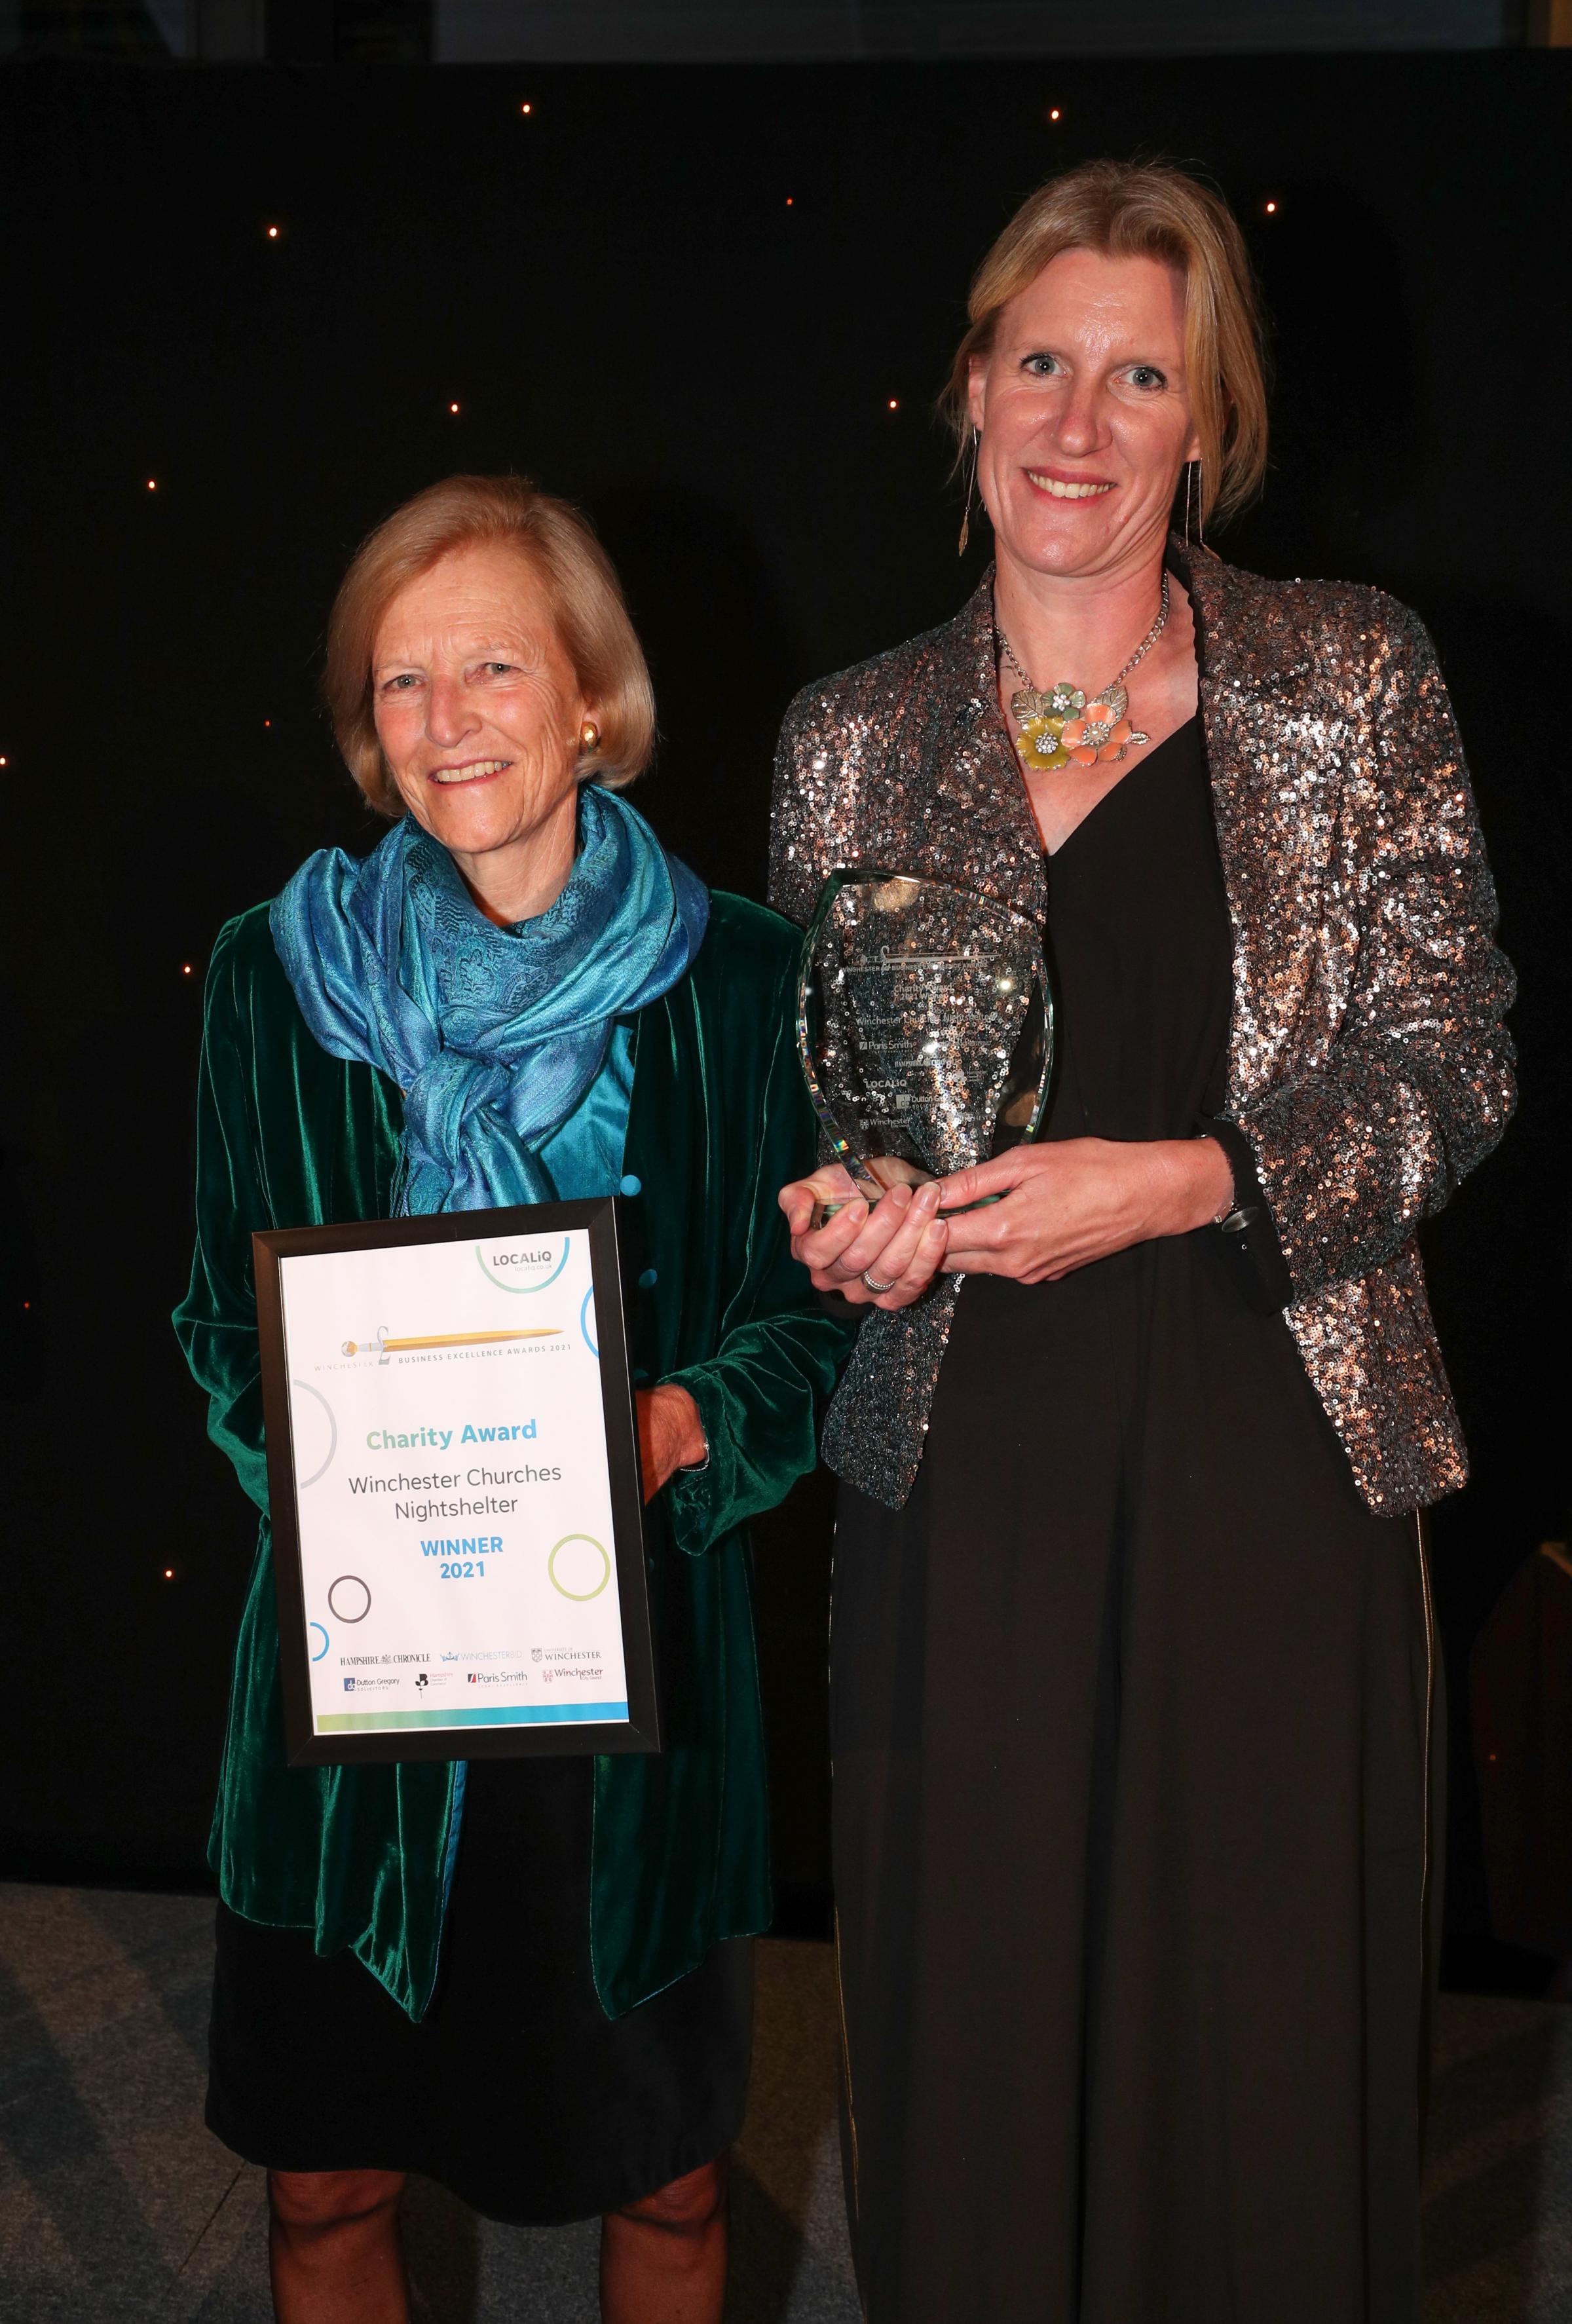 Winchester Business Excellence Awards 2021. Winner of the Charity Award Award Winchester Churches Nightshelter.